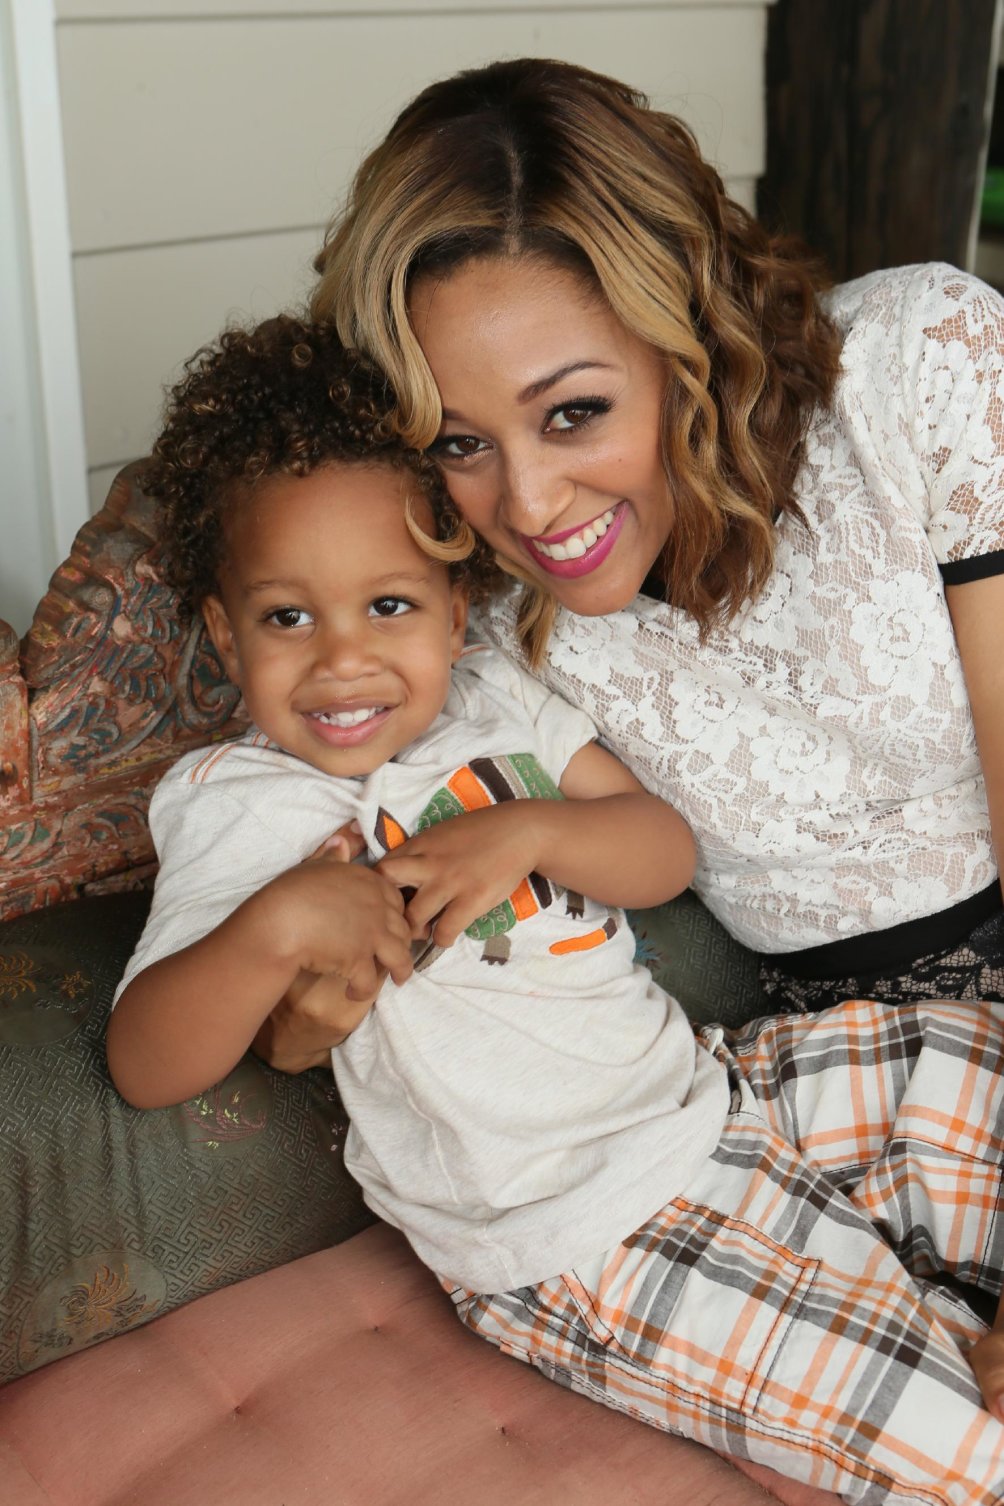 Tia Mowry and her son Cree Taylor Hardrict celebrate her 35th birthday at the LYFE Kitchen Beach House powered by KIA on Sunday July 21, 2013 in Malibu, CA. (Photo by Alexandra Wyman/Invision for Talent Resources/AP Images)